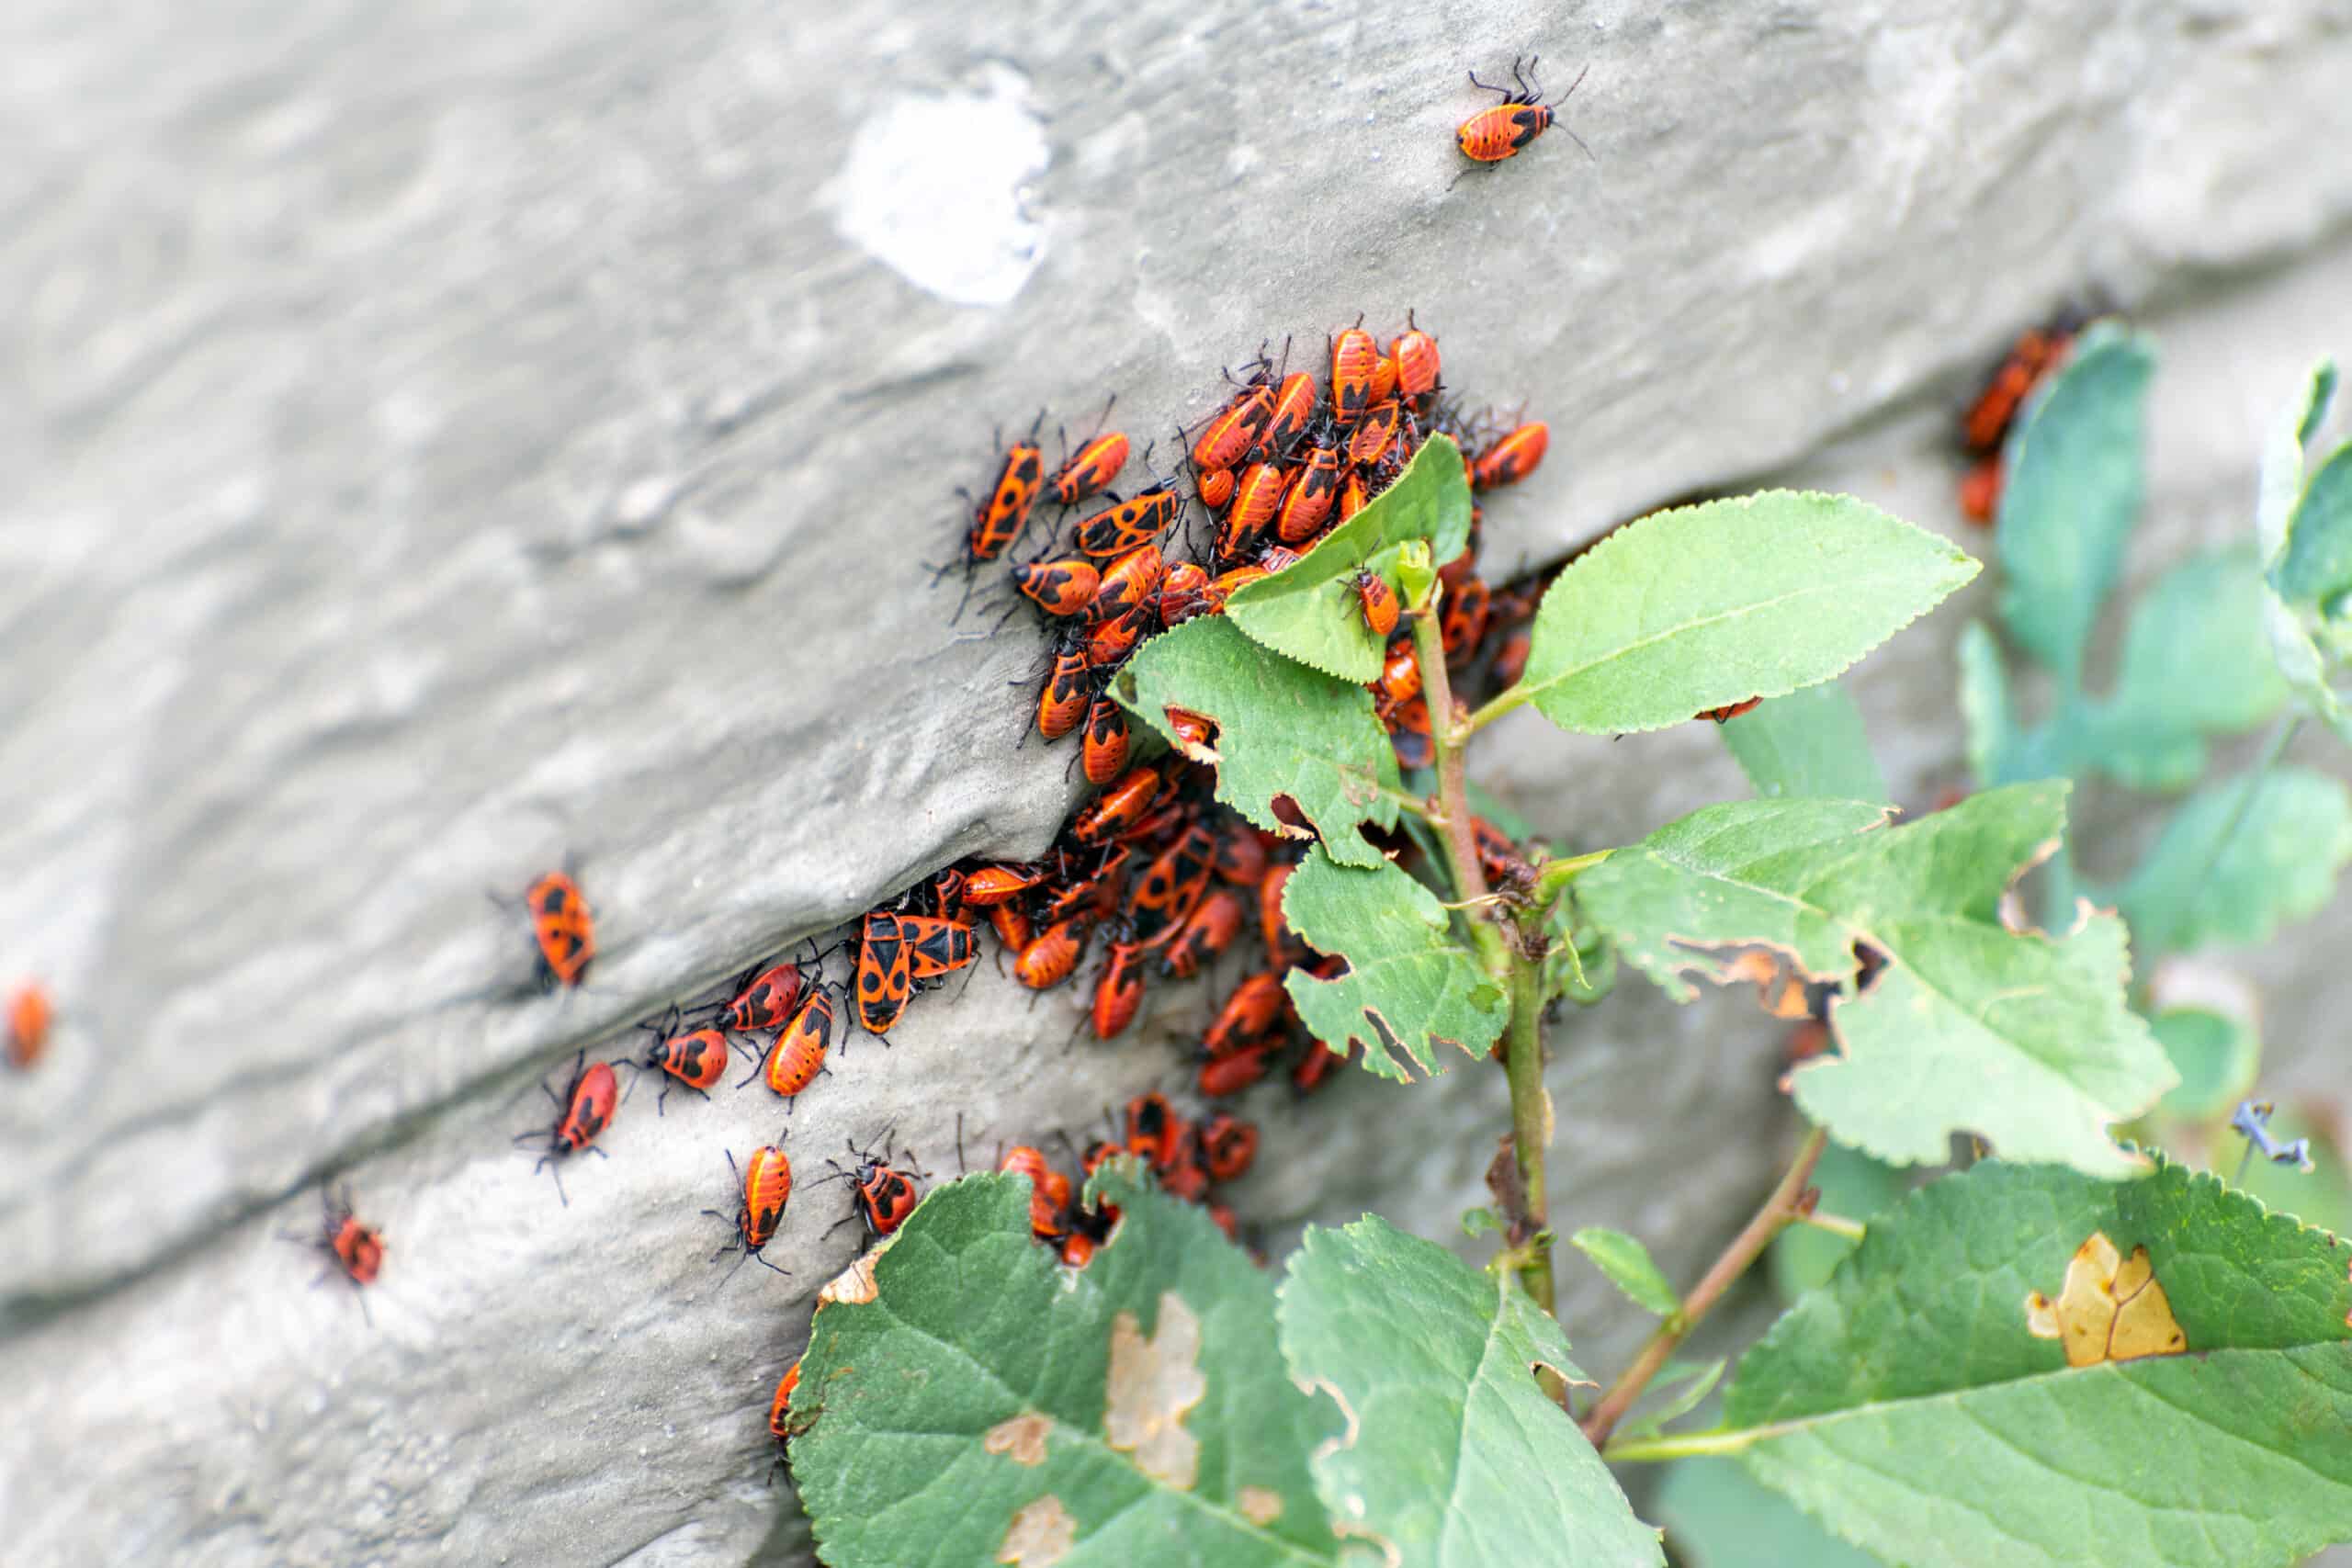 Many red bugs on the foundation of the house